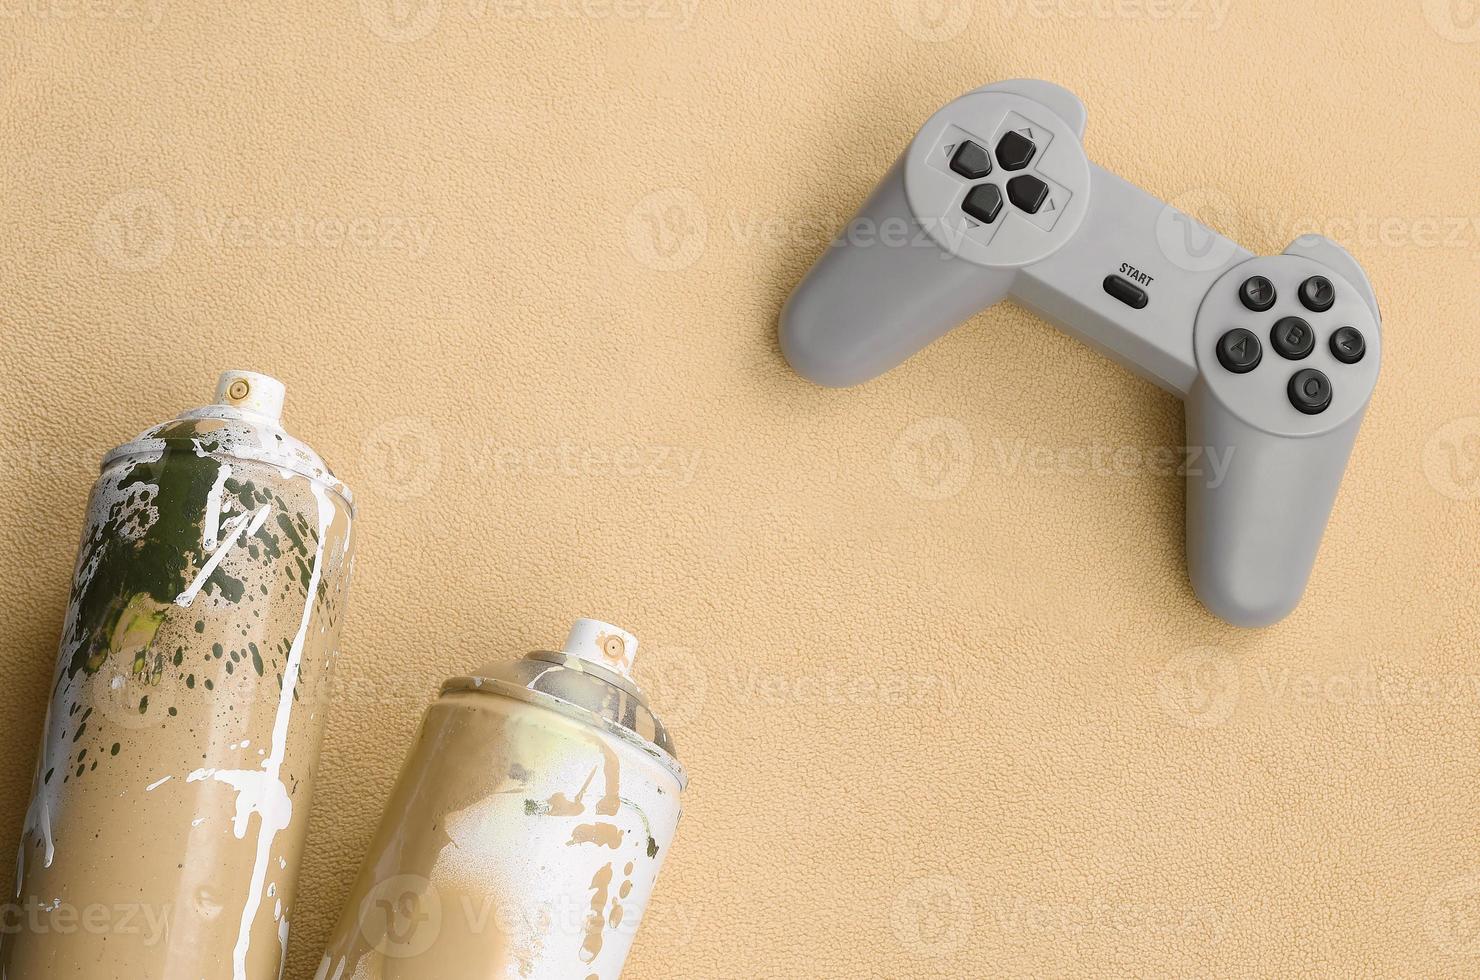 Teenagers and youth lifestyle concept. Joystick and two spray cans lies on the blanket of furry orange fleece fabric. Controllers for video games and paint cans on a plush fleece material background photo